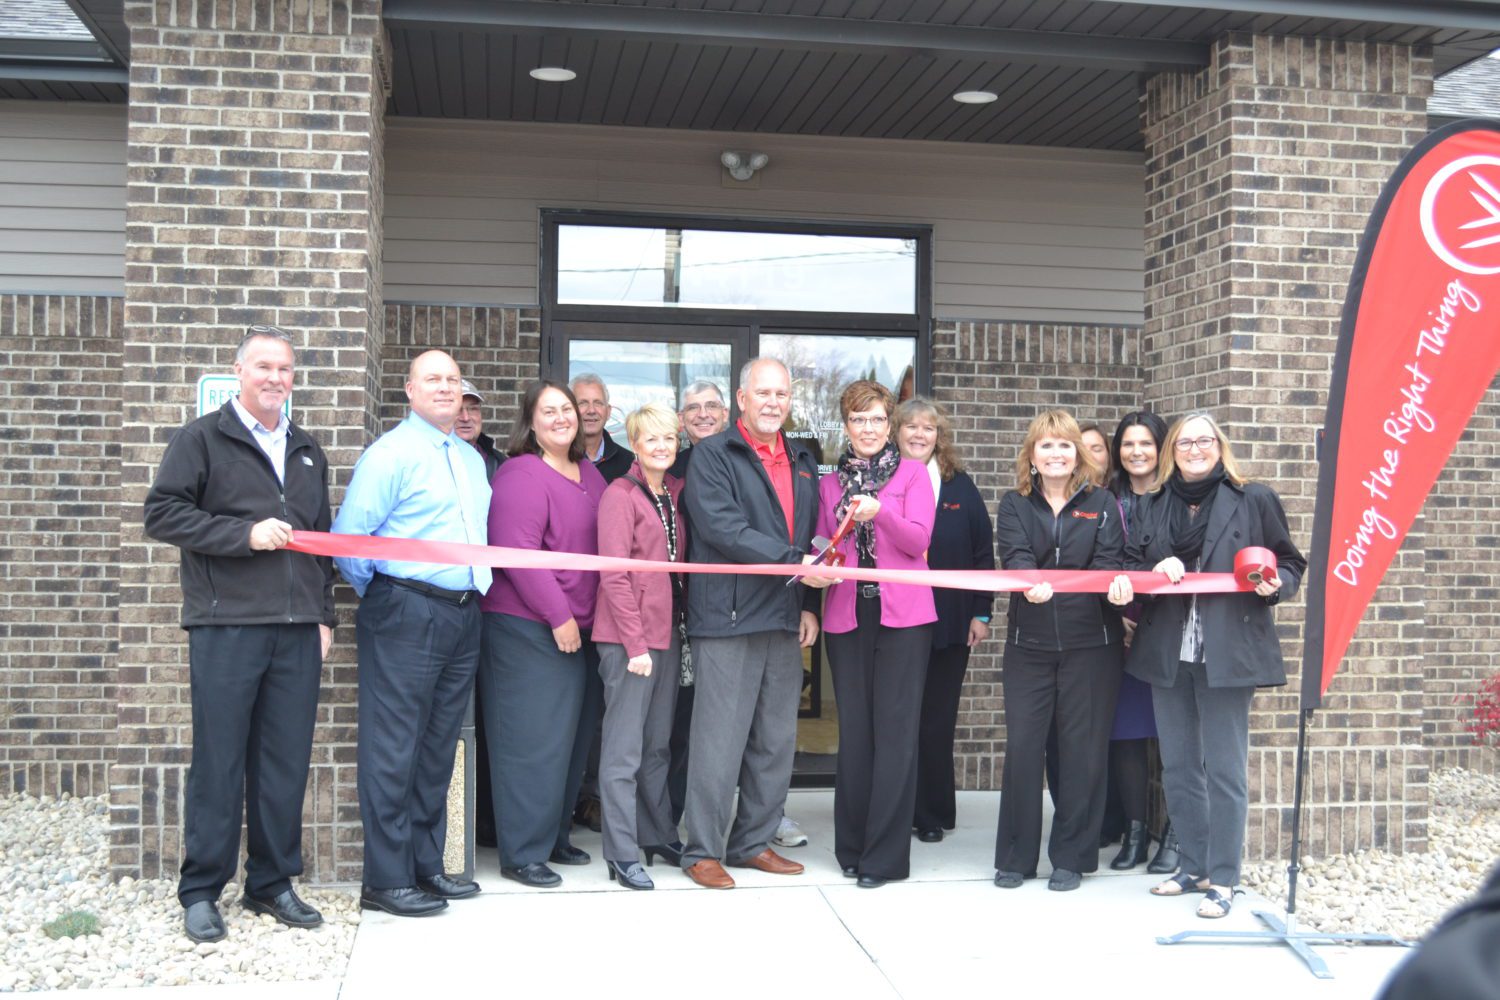 DSC 0003 - Capital Credit Union Holds Open House and Ribbon Cutting